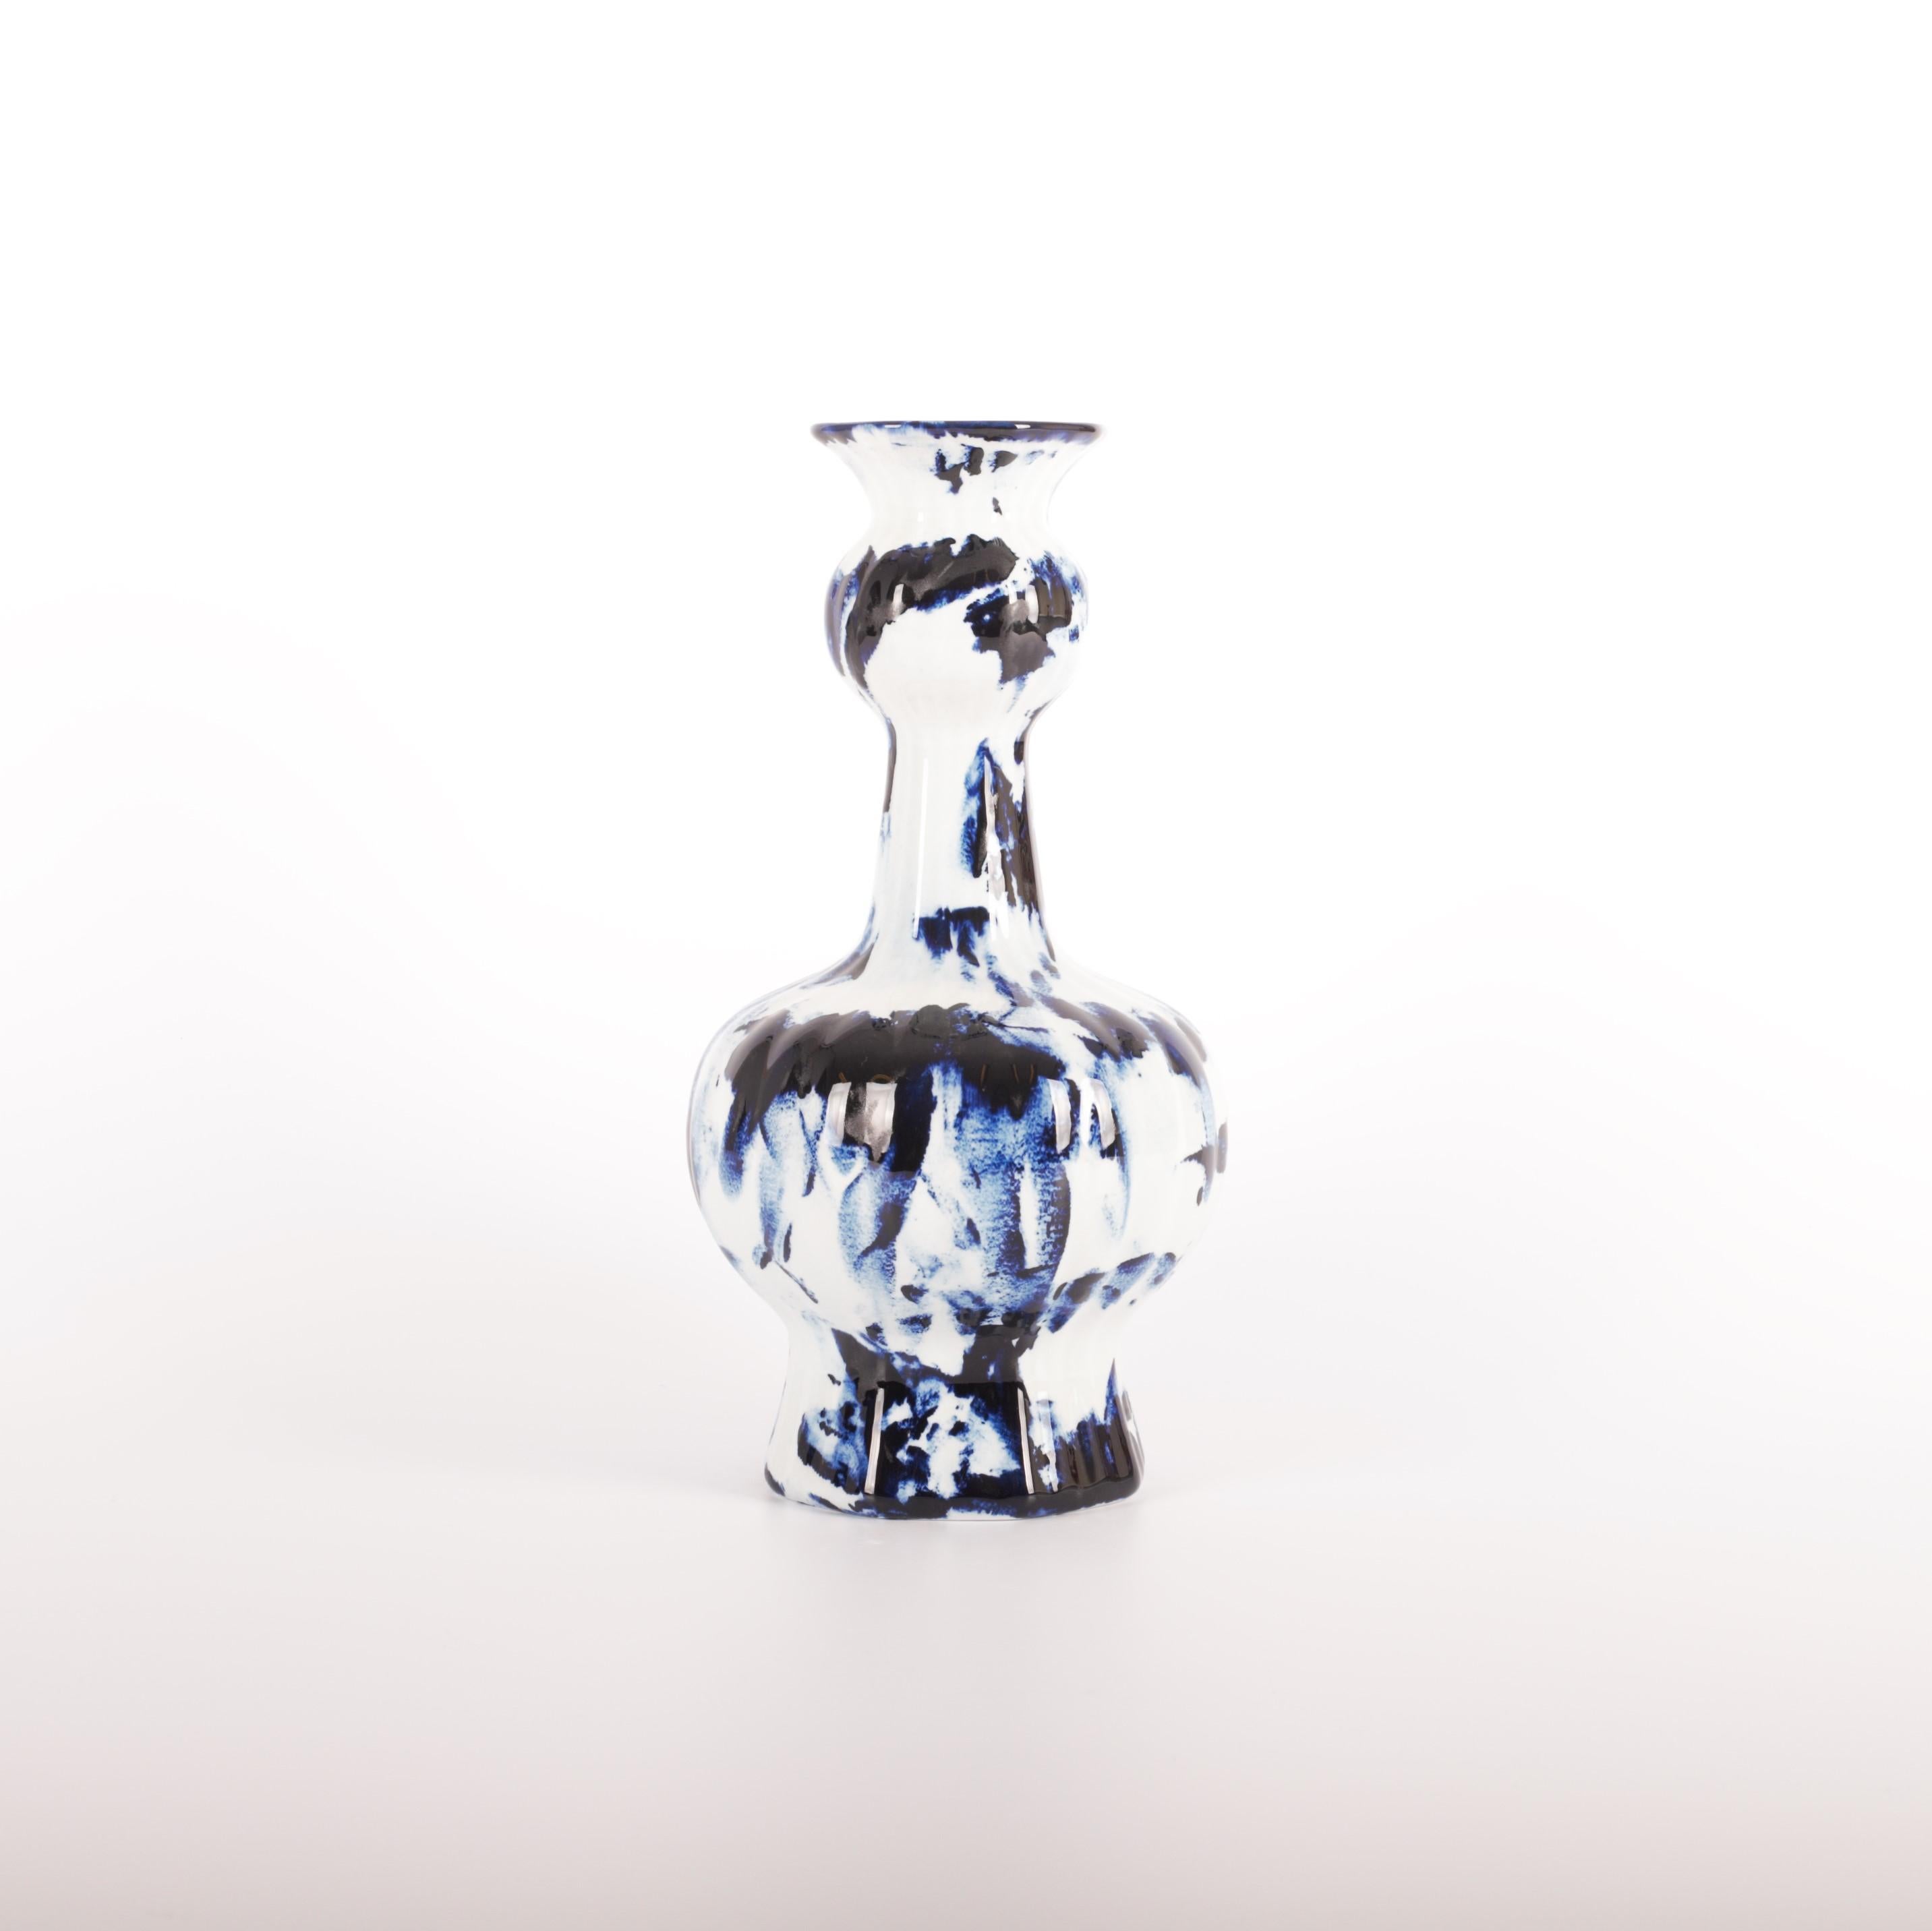 Delft Blue Longneck Vase #1, by Marcel Wanders, Hand Painted, 2006, Unique In New Condition For Sale In Amsterdam, NL